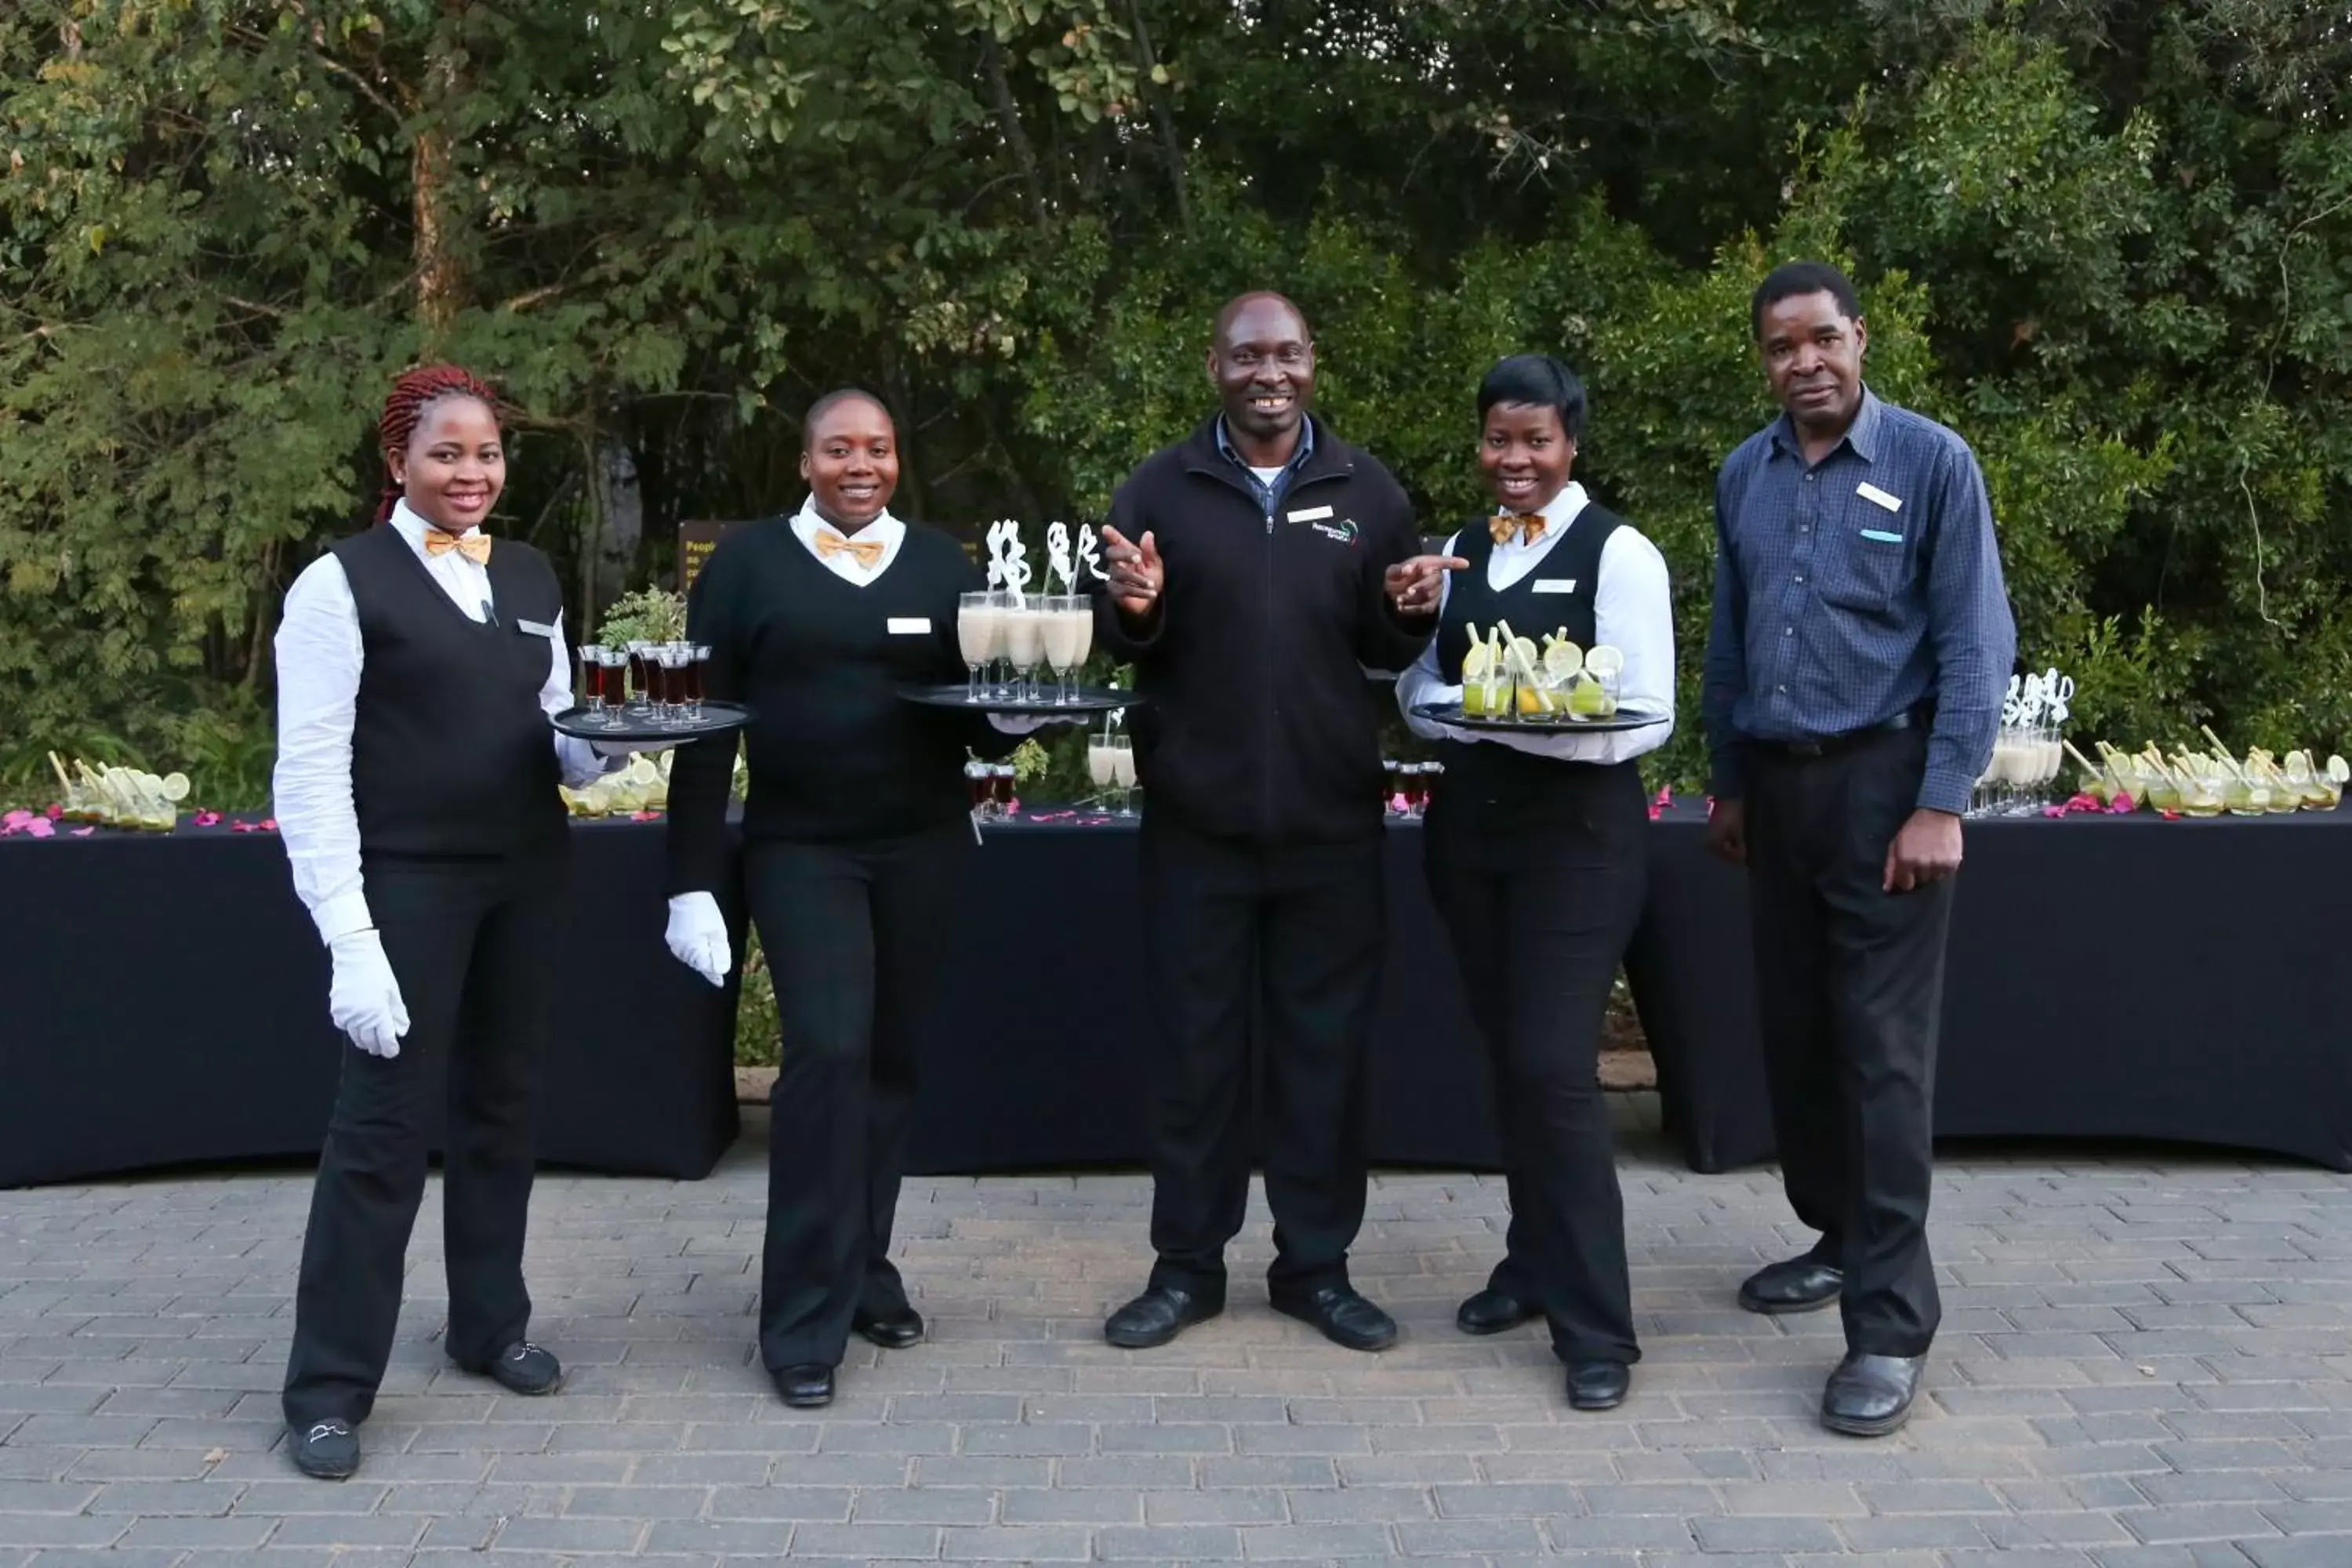 Staff in Misty Hills Country Hotel, Conference Centre & Spa